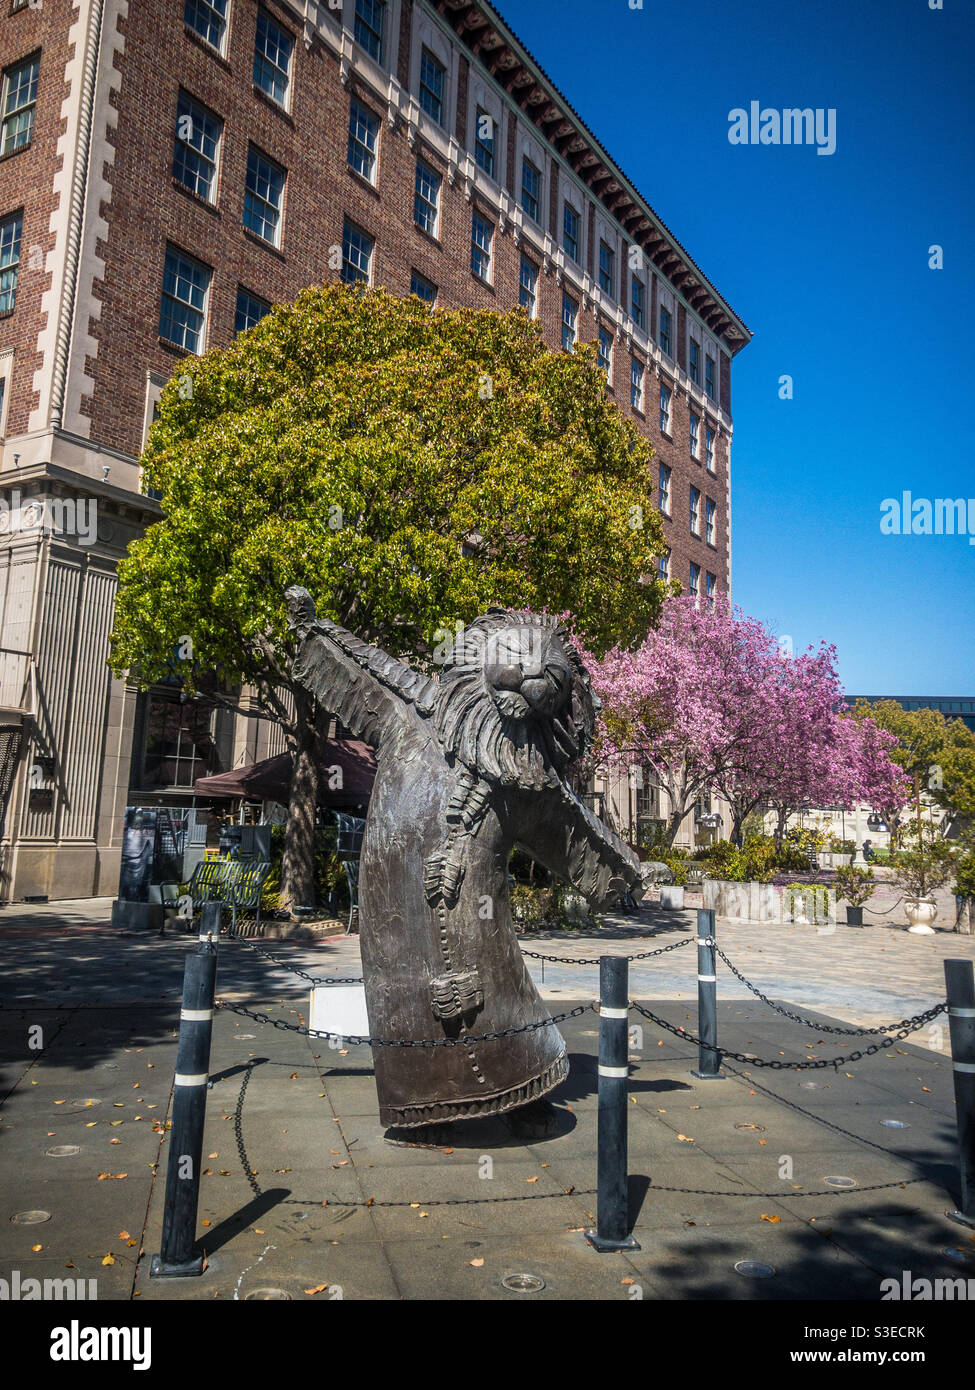 Leo the lion in front of the Culver Hotel in Culver City, California Stock Photo